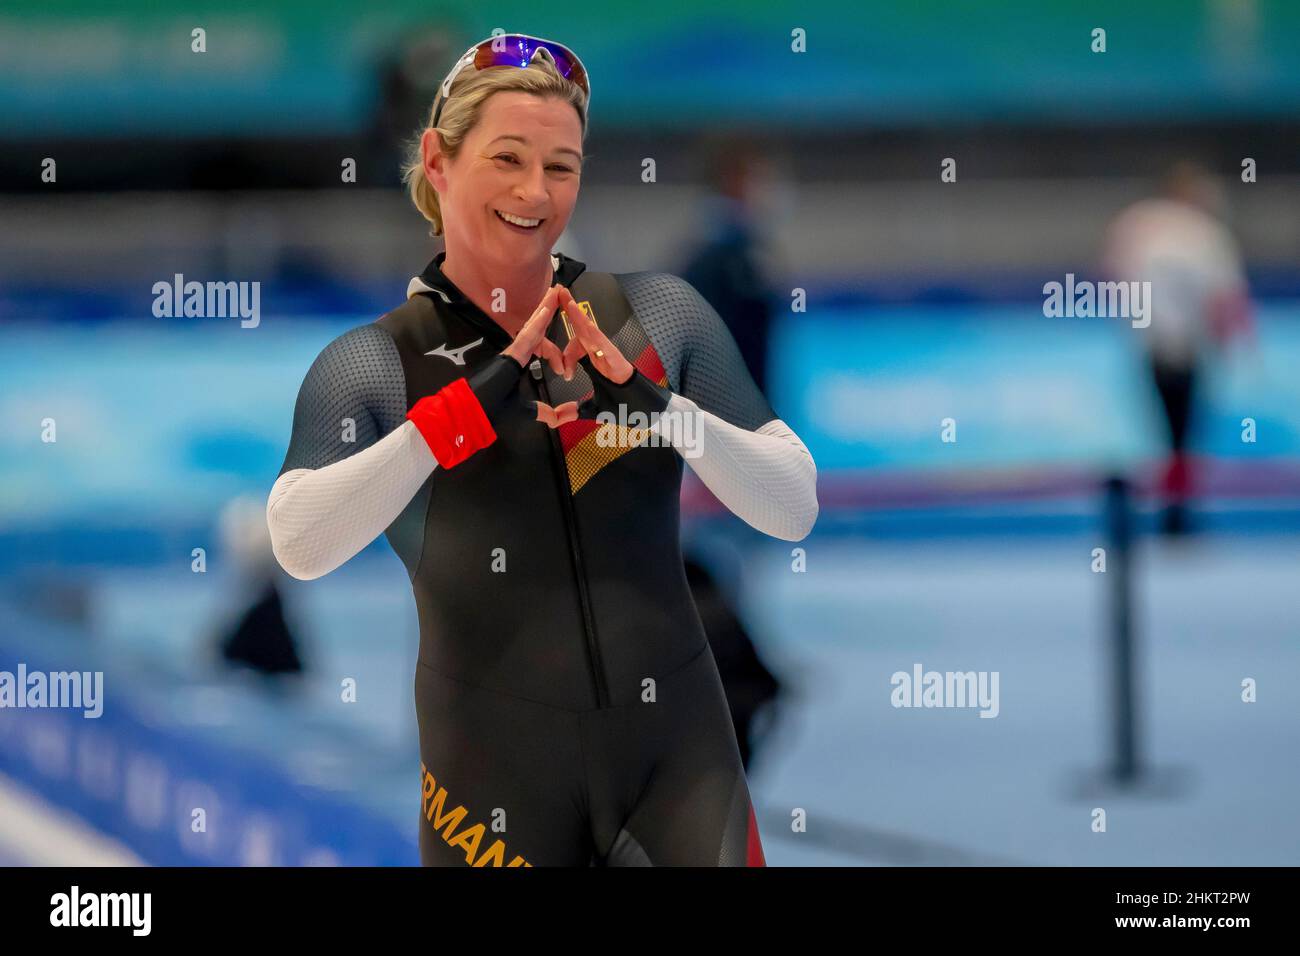 Beijing, Hebei, China. 5th Feb, 2022. Claudia PECHSTEIN (Germany) races through the turns during her Women's 300m match at the National Speed Skating Oval in Beijing, China. (Credit Image: © Walter G. Arce Sr./ZUMA Press Wire) Stock Photo